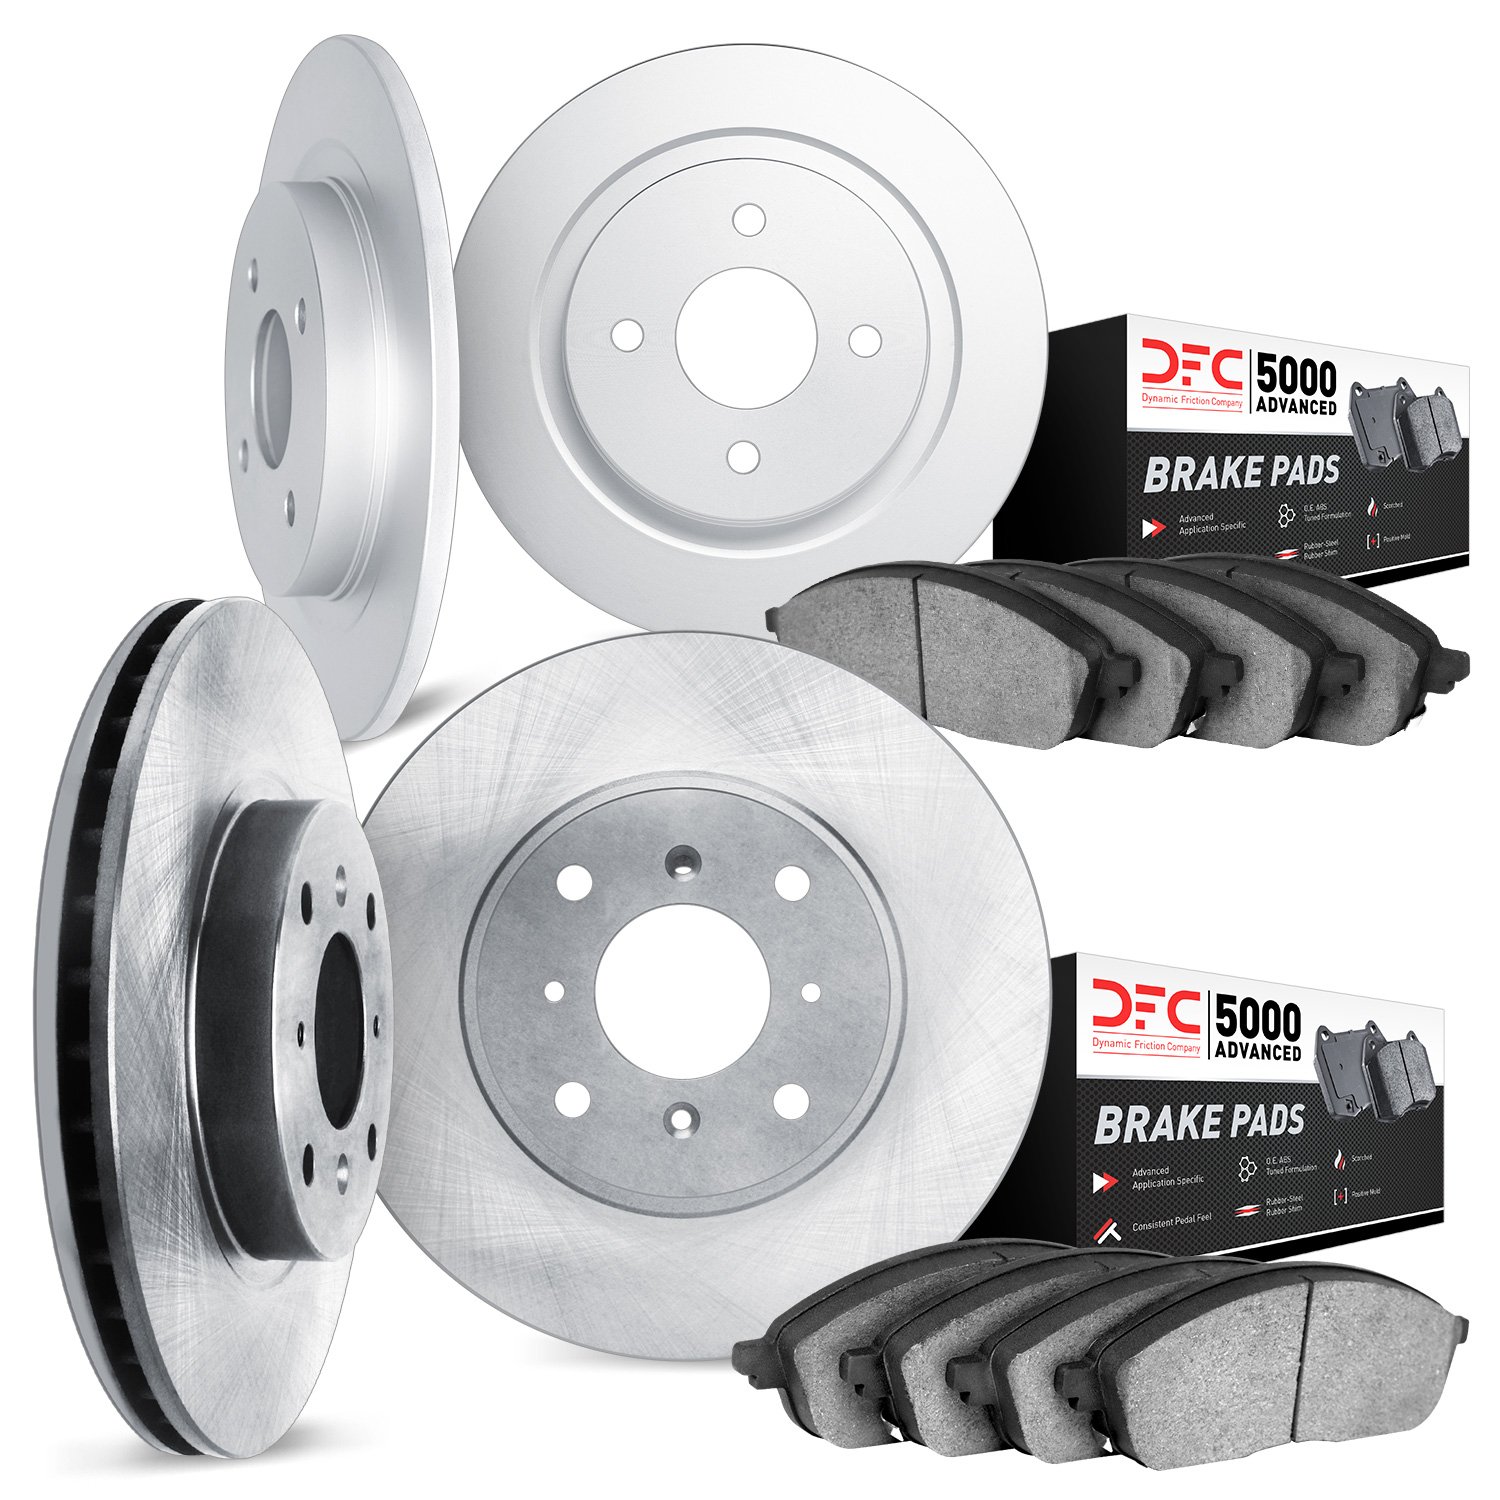 6504-72106 Brake Rotors w/5000 Advanced Brake Pads Kit, 1992-1996 Multiple Makes/Models, Position: Front and Rear